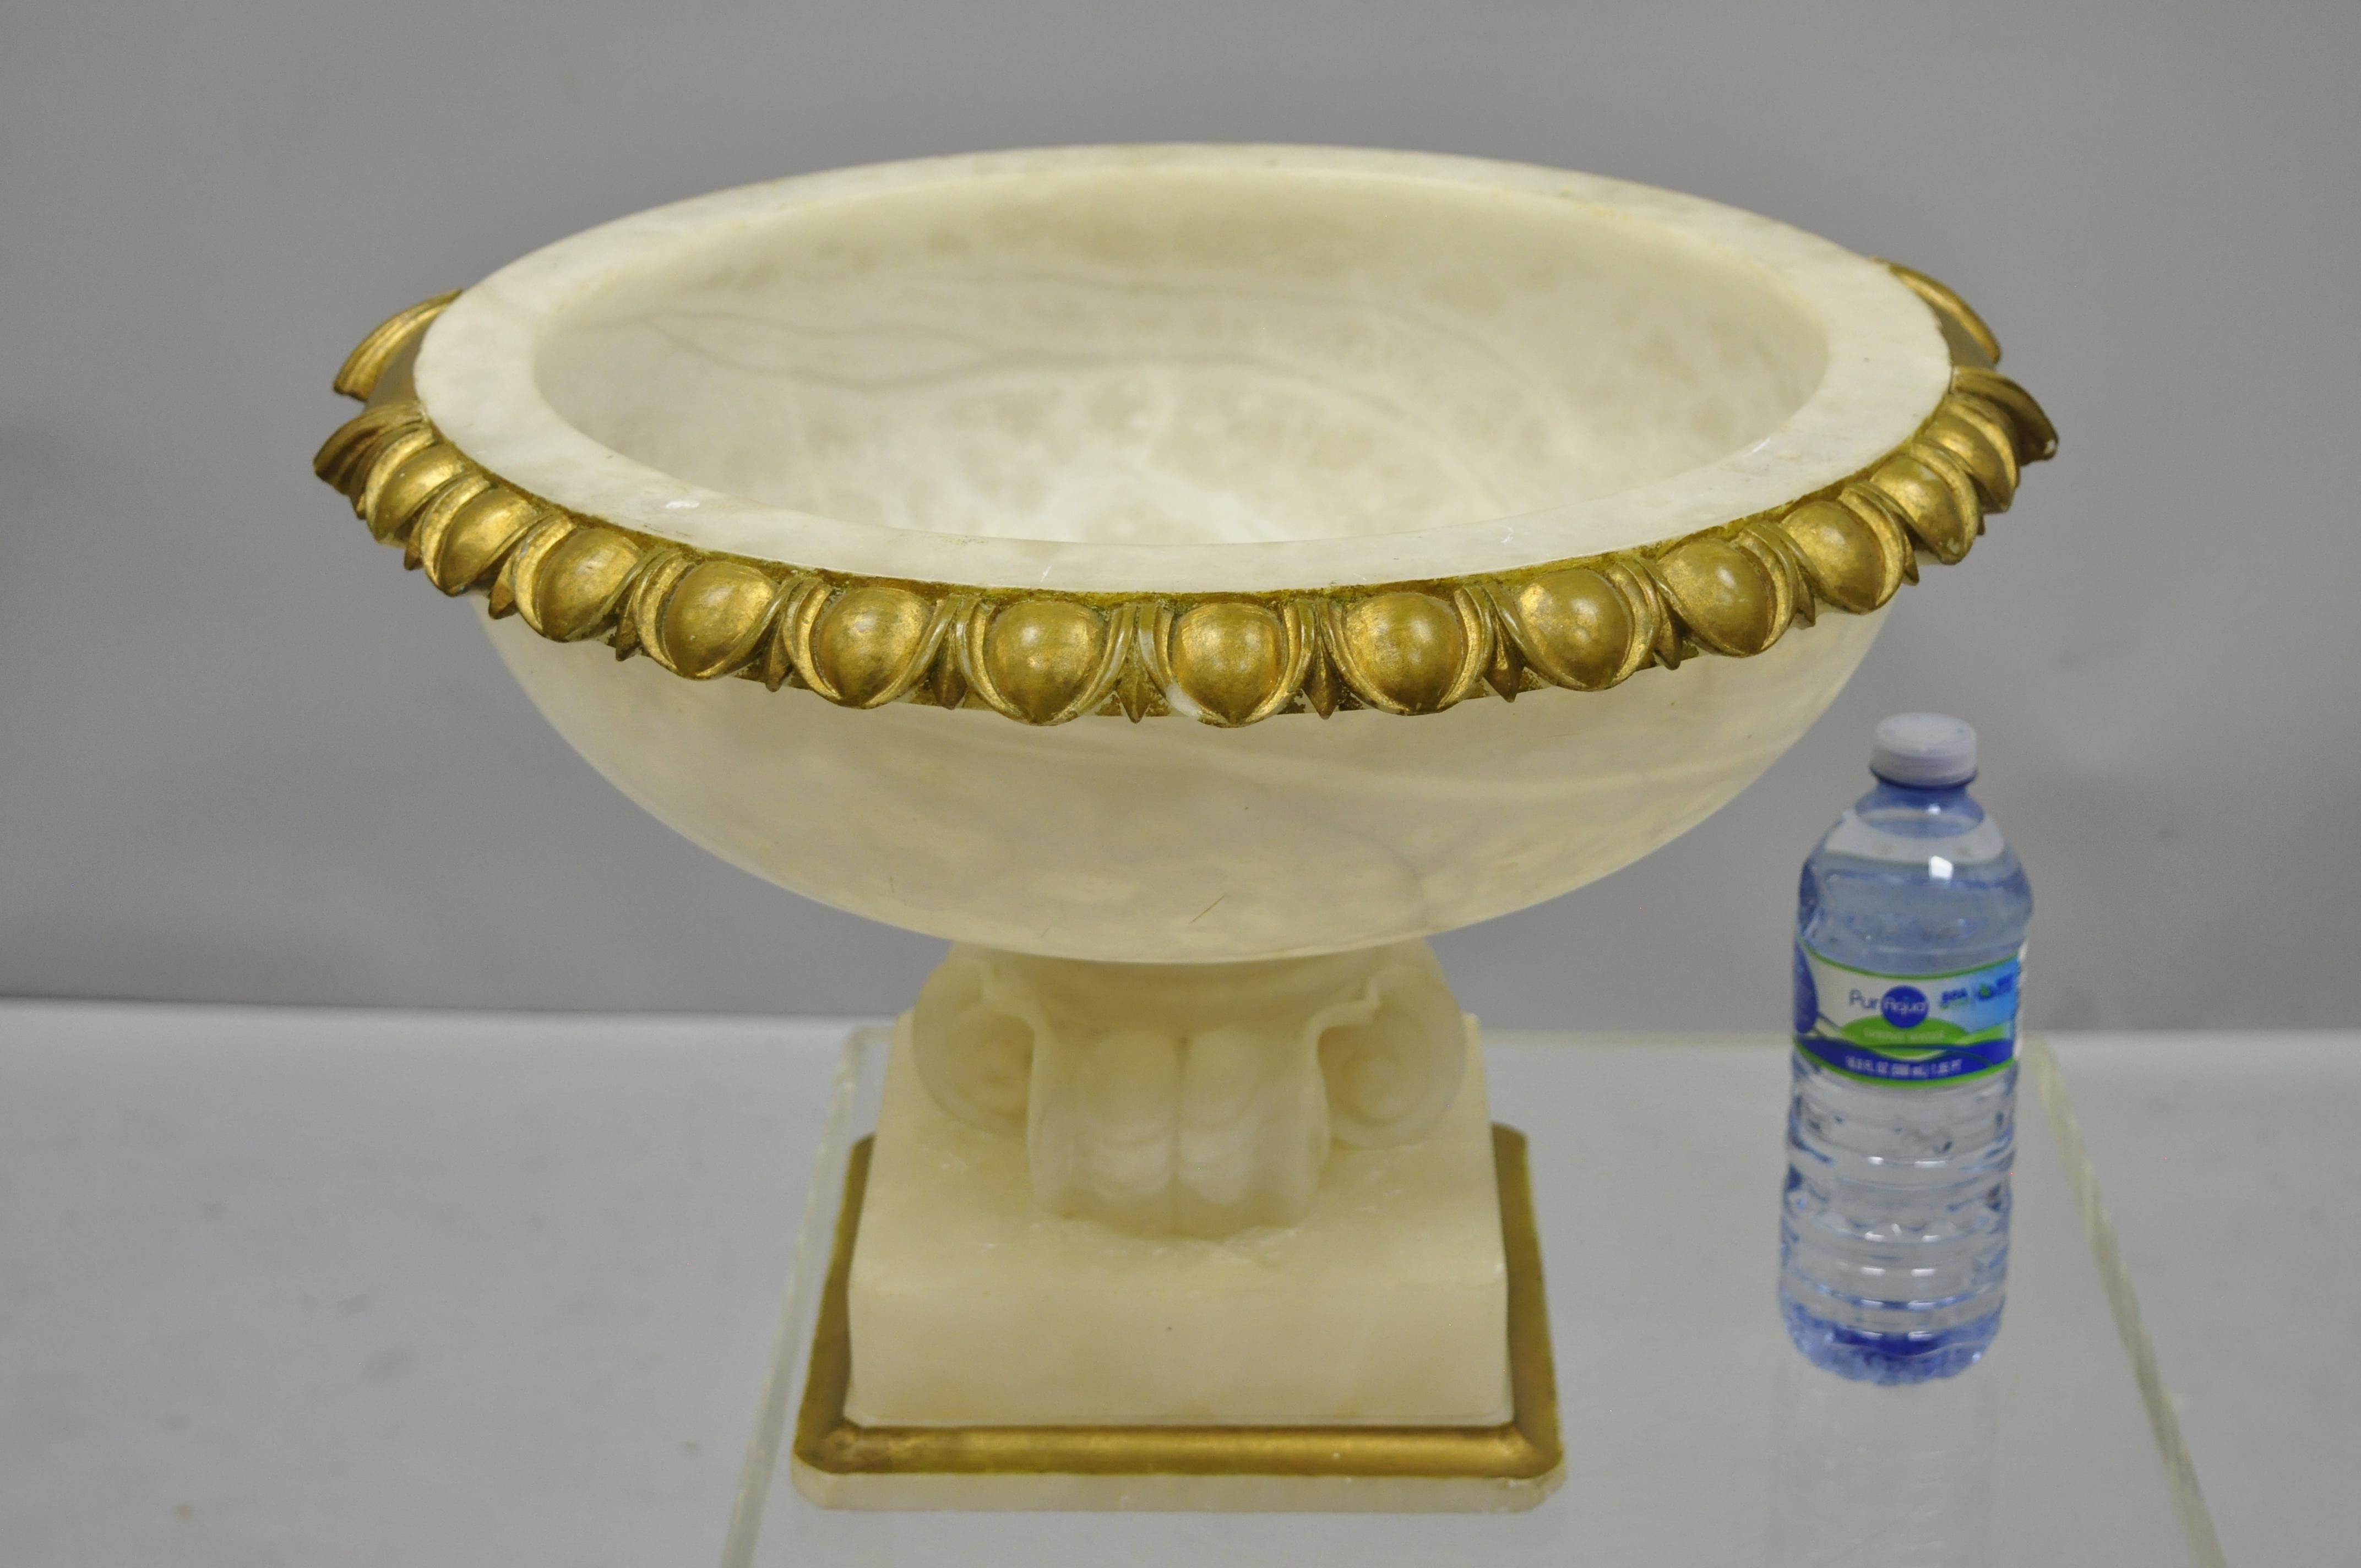 Antique French carved alabaster large table centerpiece fruit bowl. Item features large impressive carved alabaster form, gold painted accents, pedestal base, very nice antique item, weighs approximately 30lbs, circa early to mid-20th century.